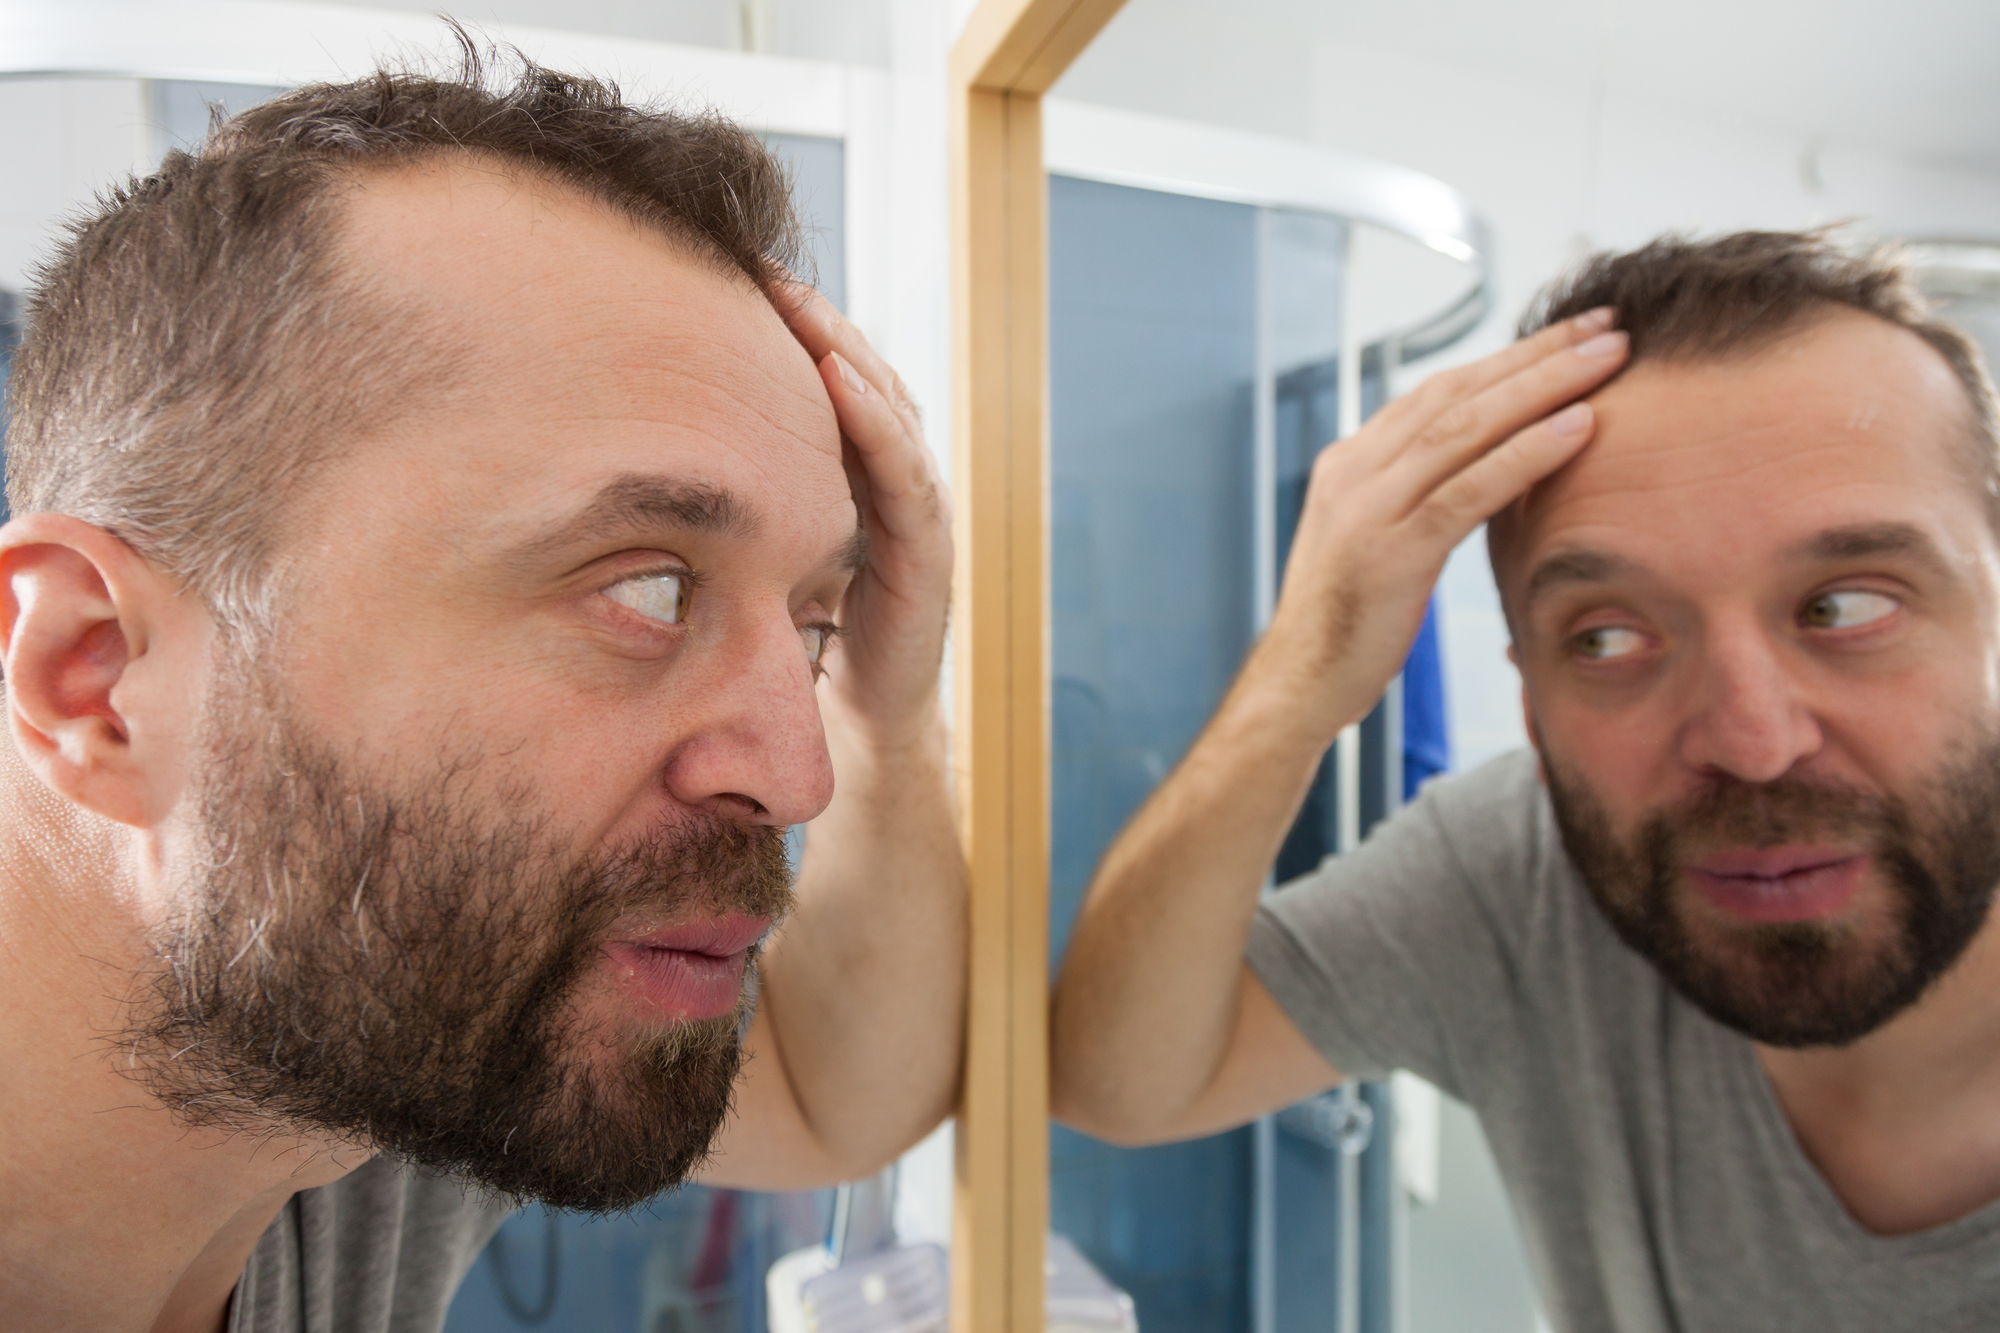 A man with a beard and short hair examines his reflection closely in a bathroom mirror, looking concerned. He is holding his head with both hands, focusing on the top of his head. The bathroom features a modern shower enclosure in the background.